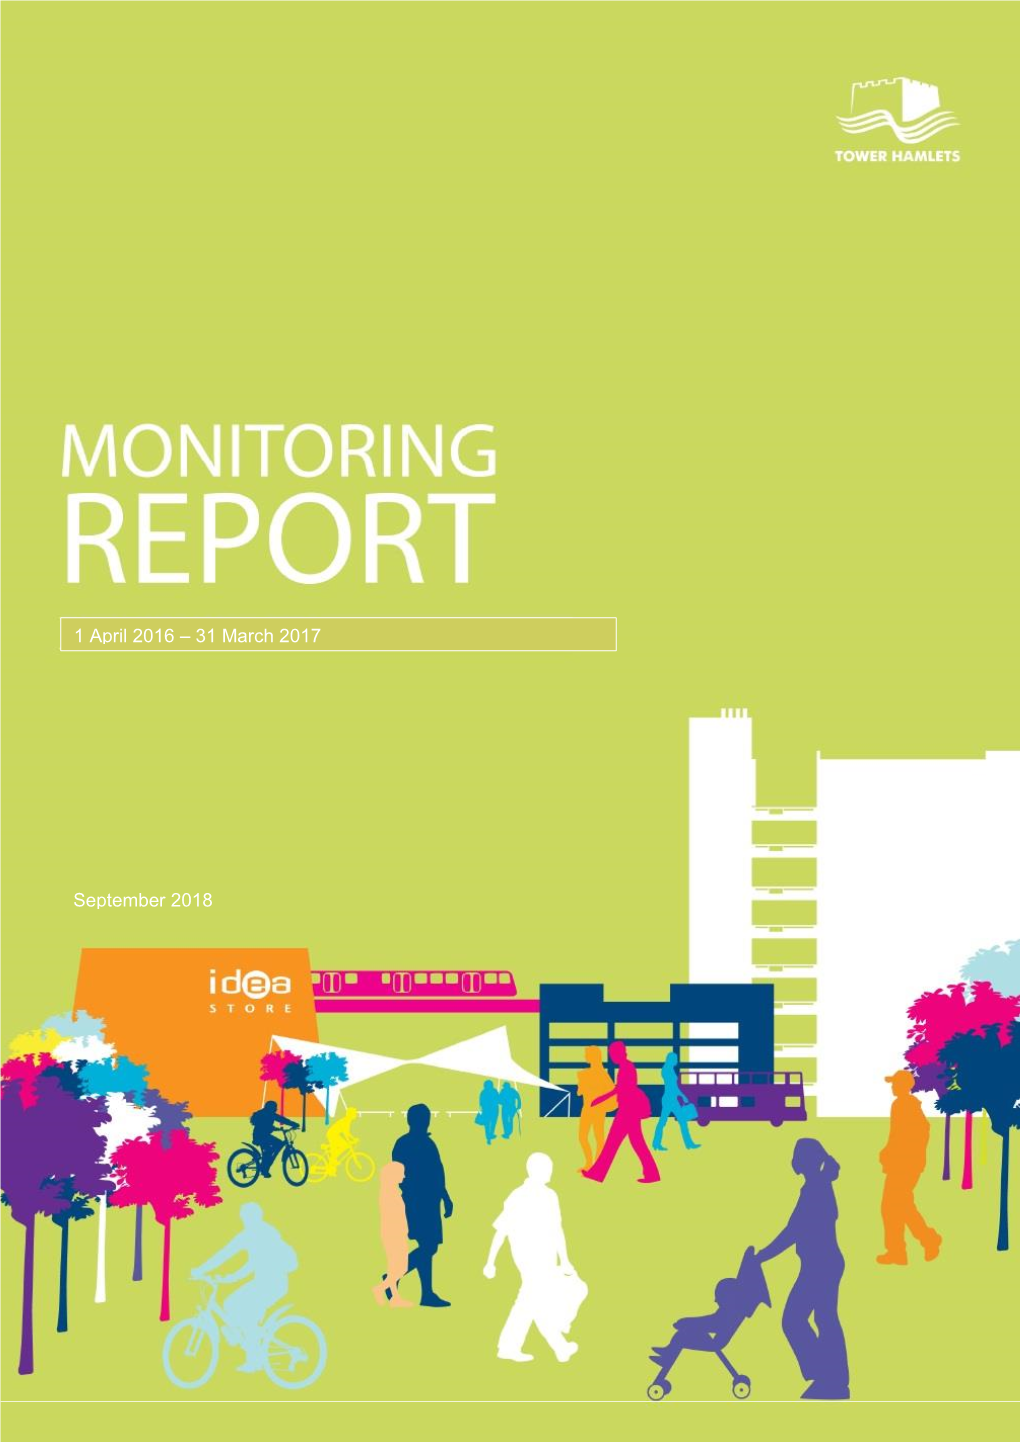 Annual Monitoring Report for 2017